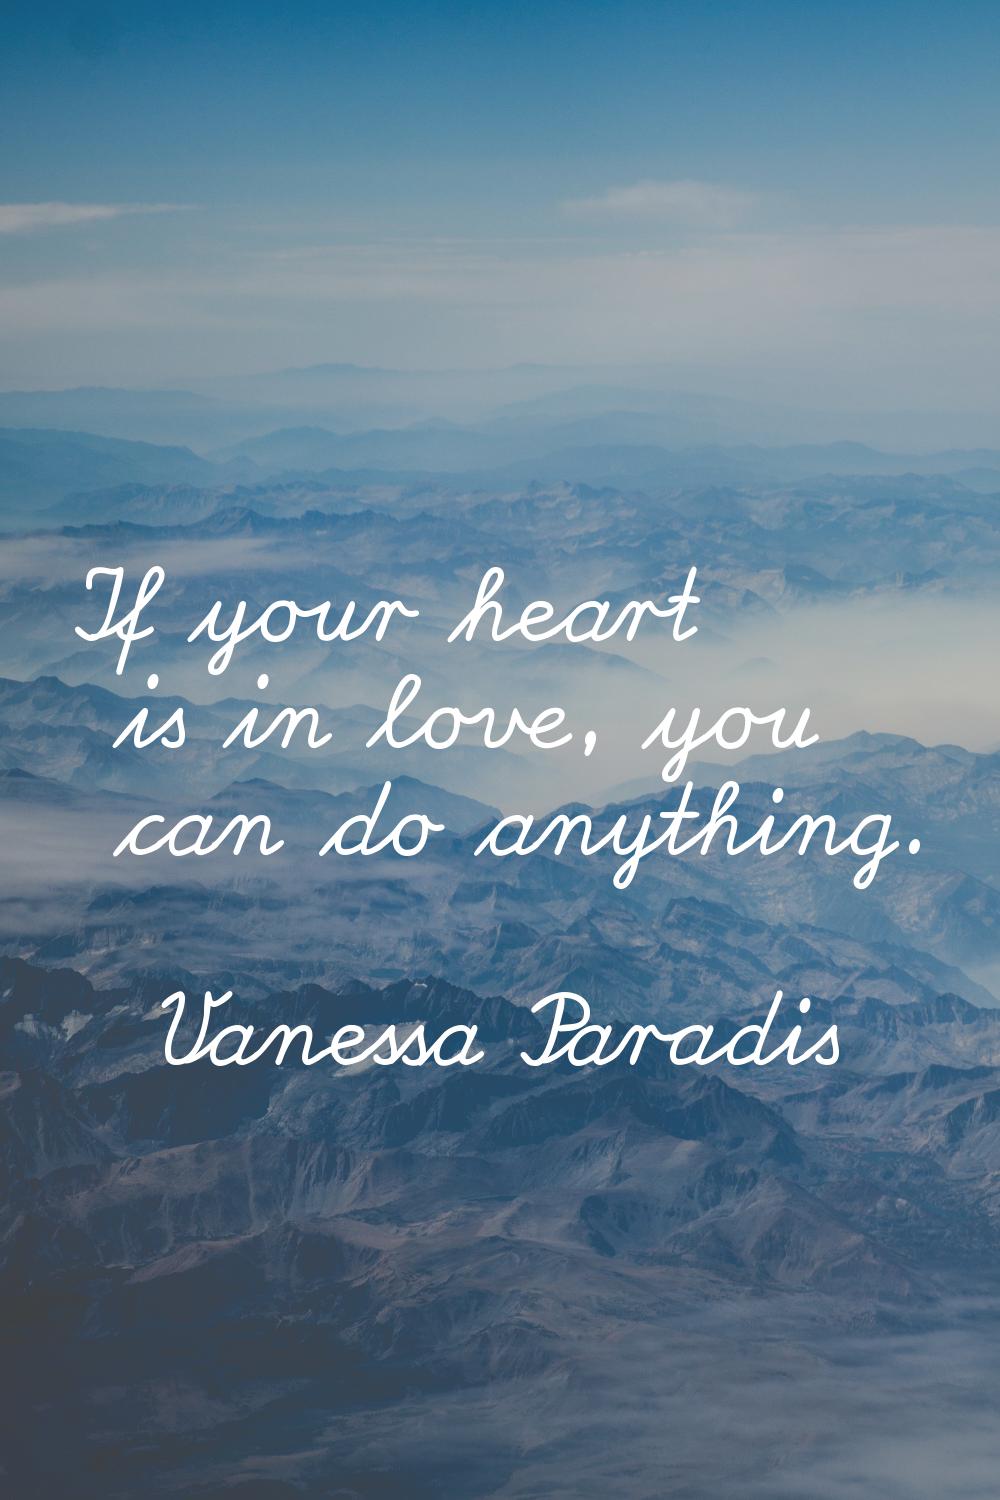 If your heart is in love, you can do anything.